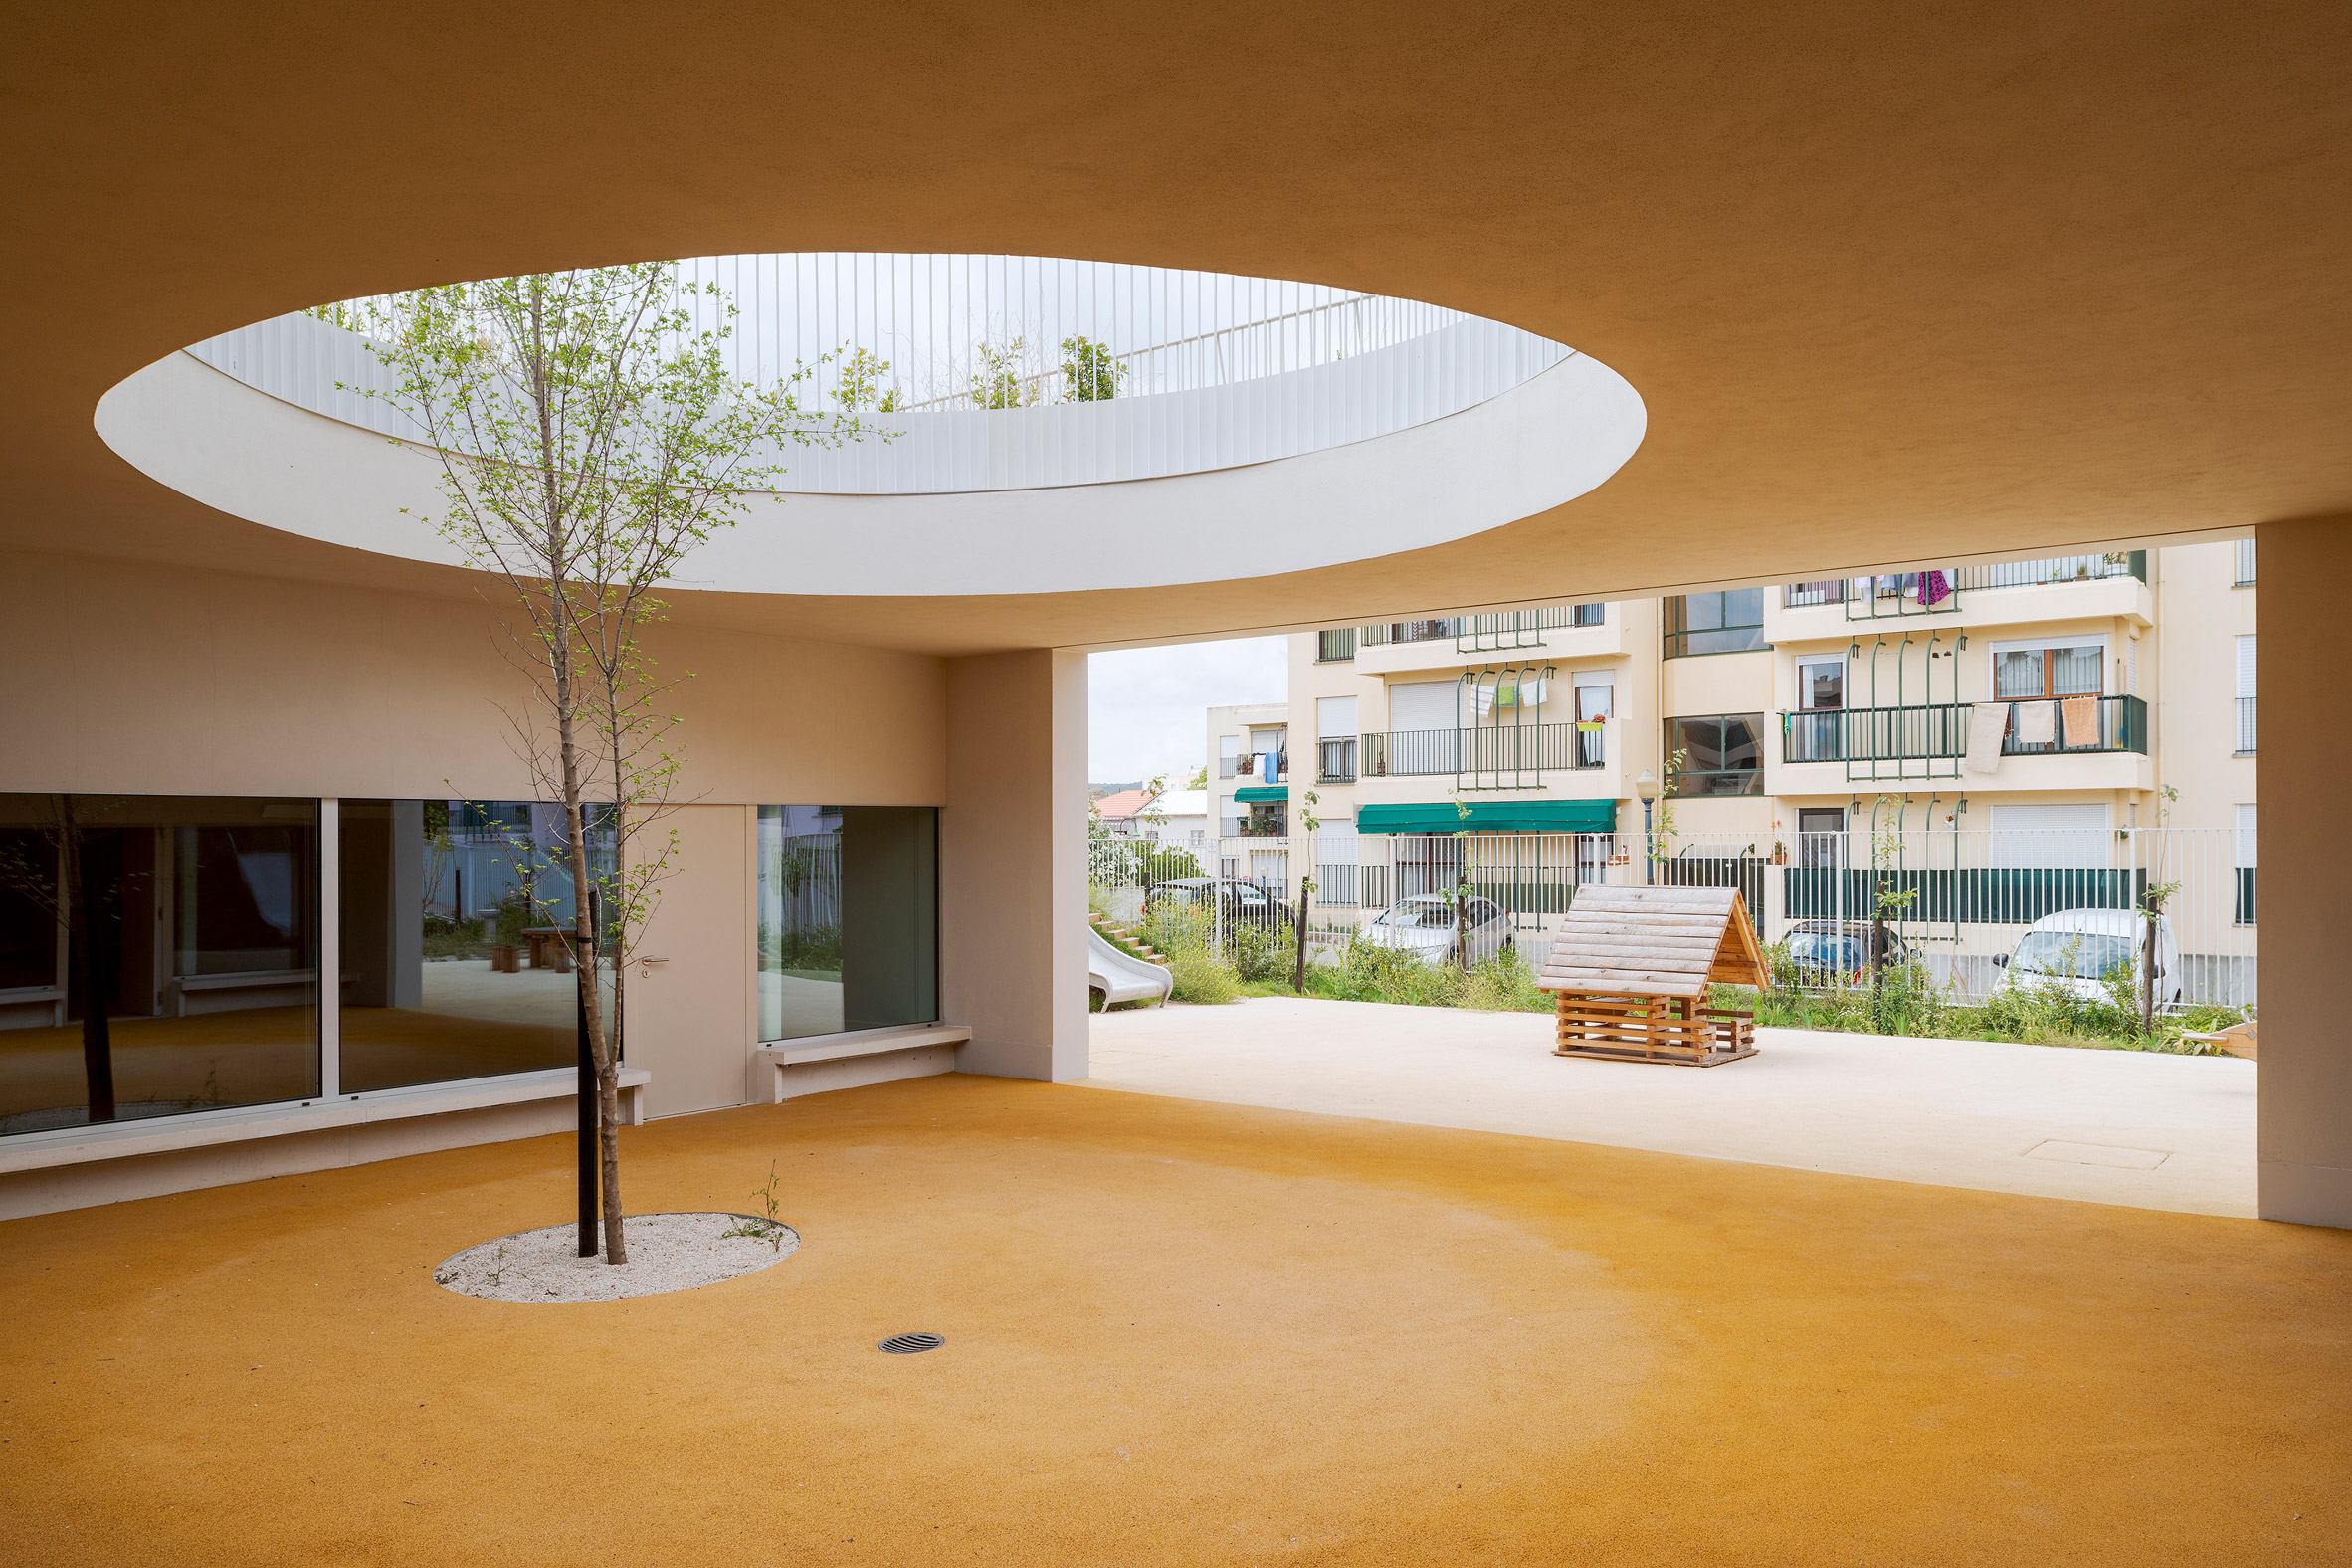 Site Specific Arquitectura added an extension to a 1950s school in Caselas, Lisbon